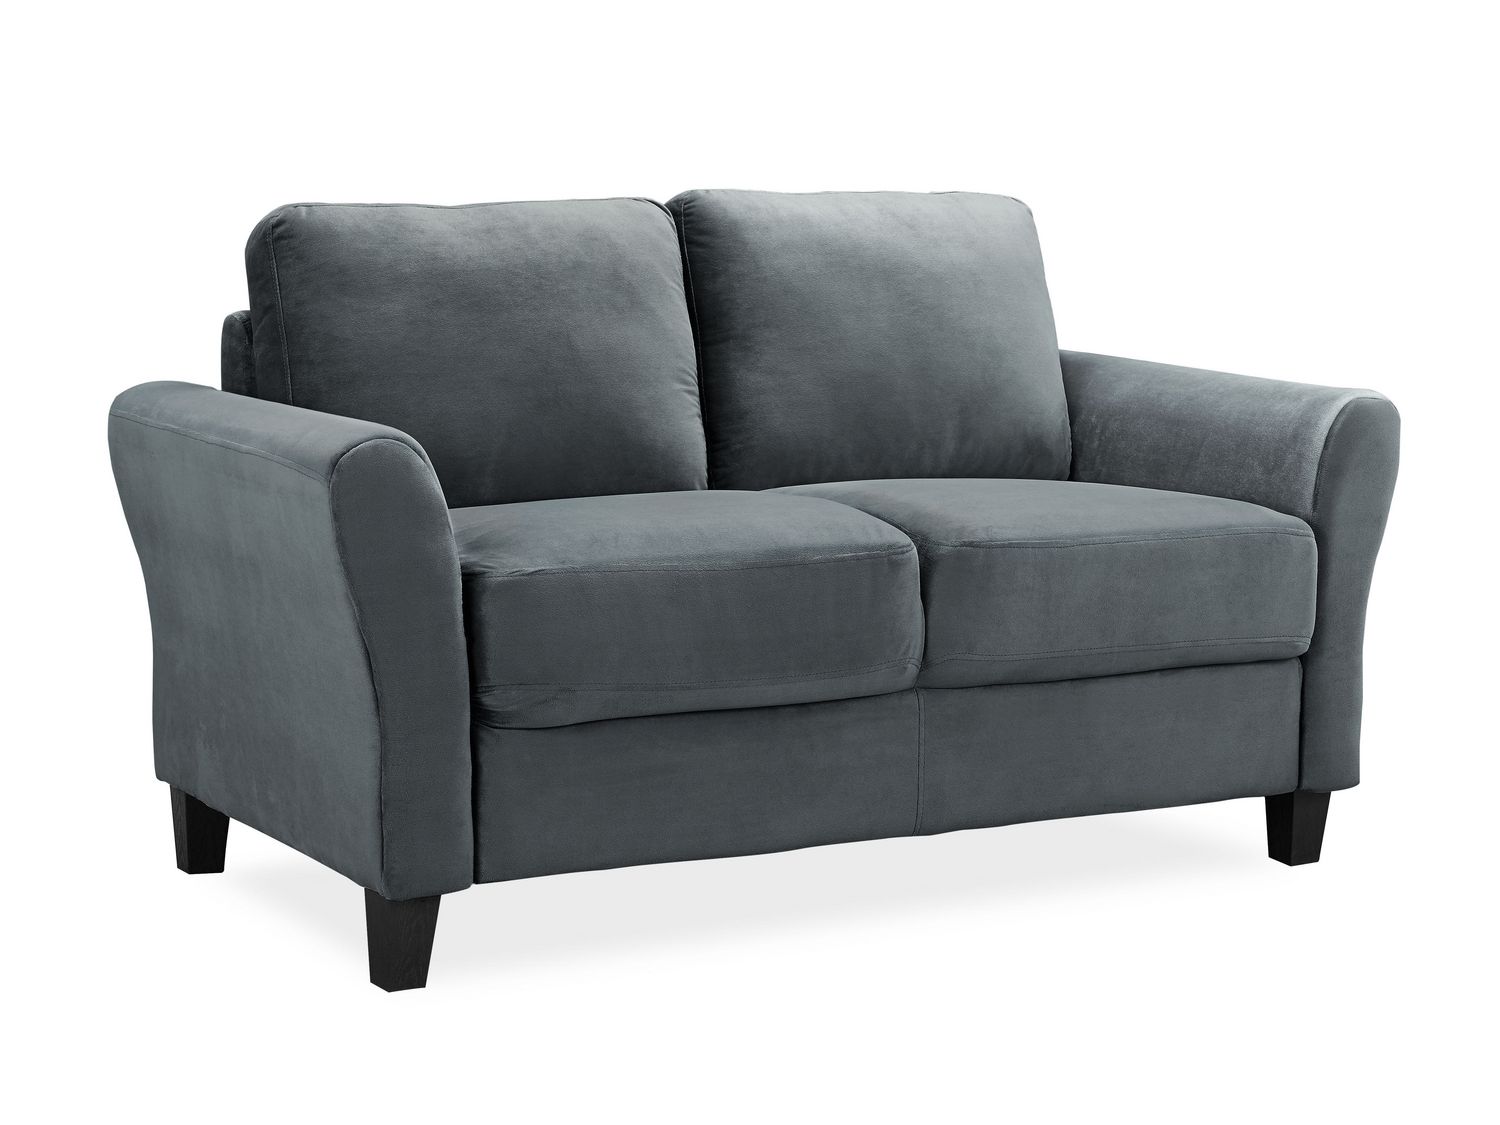 Sectional Sofas Living Room Sets For Home At Walmartca